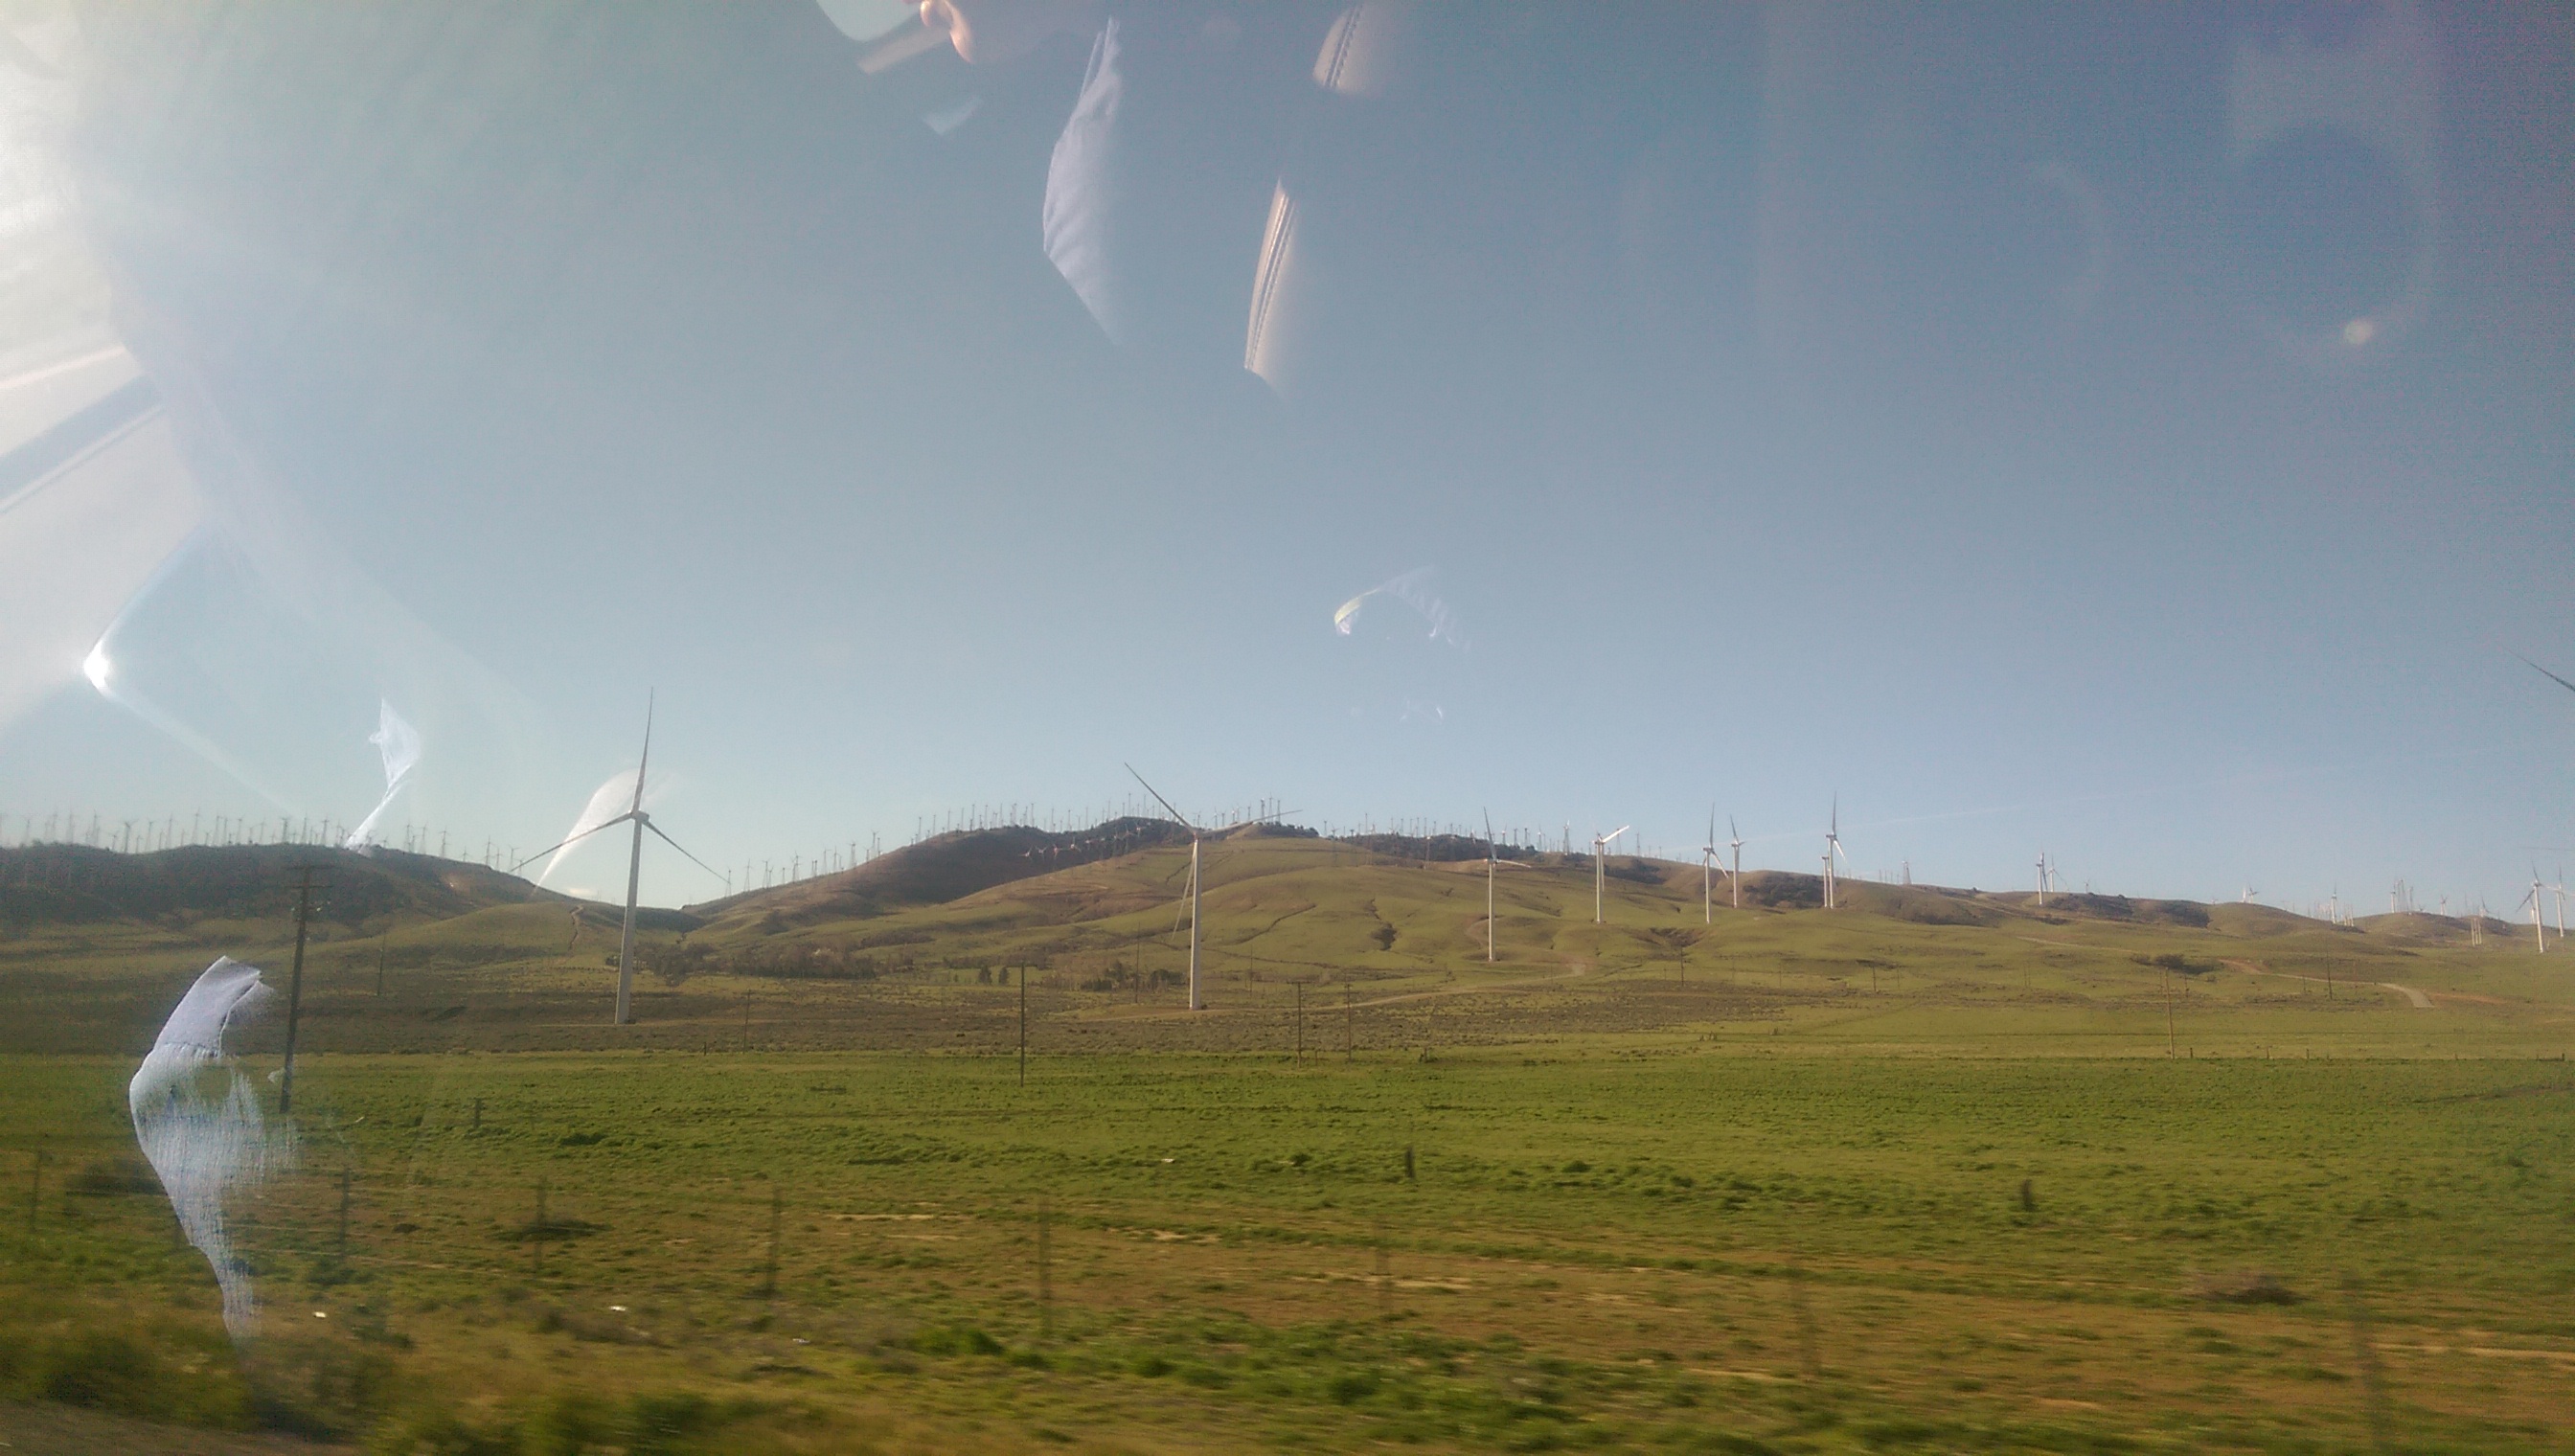 /zh-cn/posts/2016/03/spring-break-in-california/to-the-south/wind-turbines.jpg